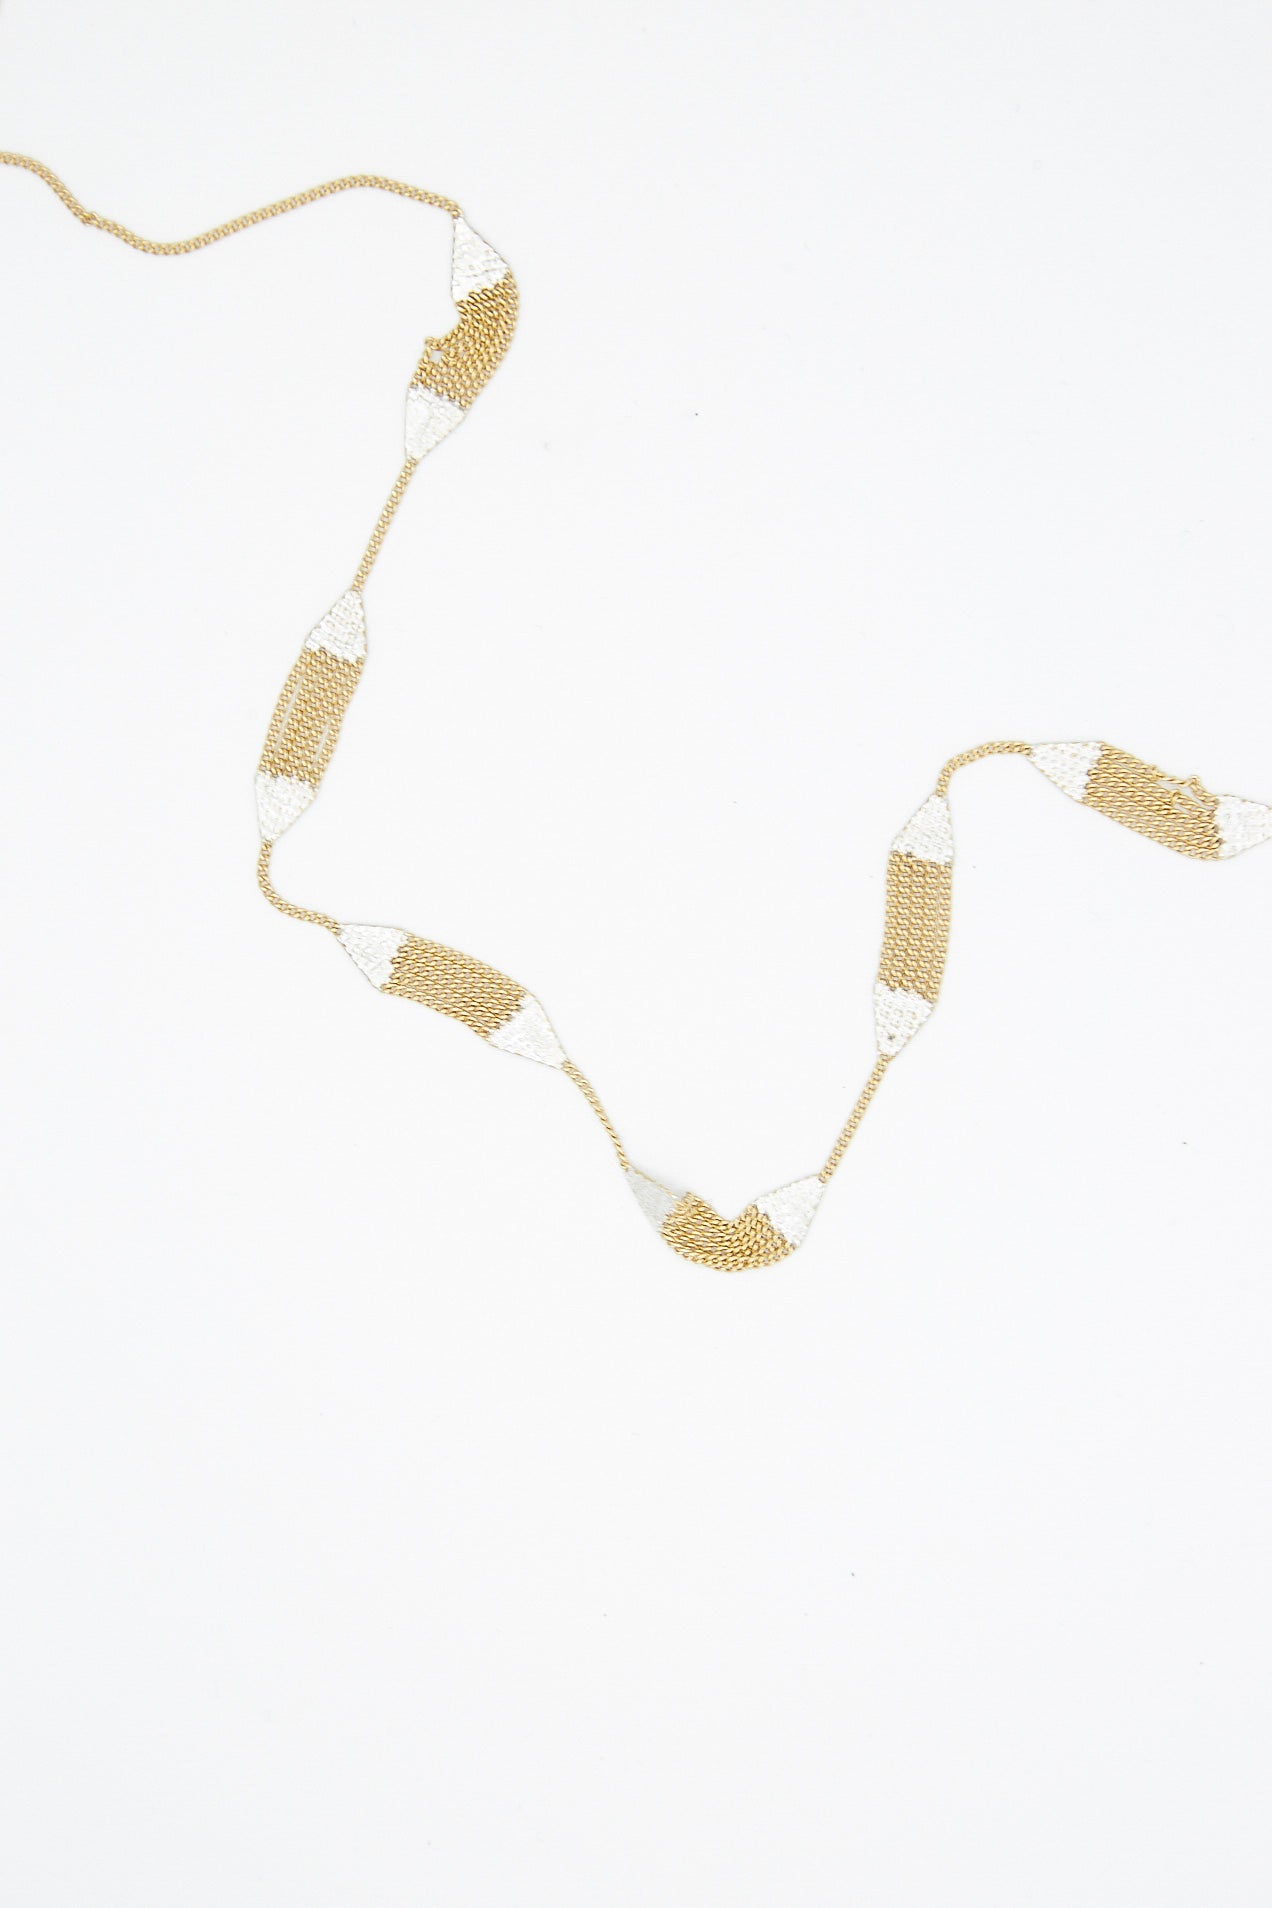 A handmade Hannah Keefe Minnow Necklace in Brass Chain and Silver Solder, featuring geometric forms and made in California.